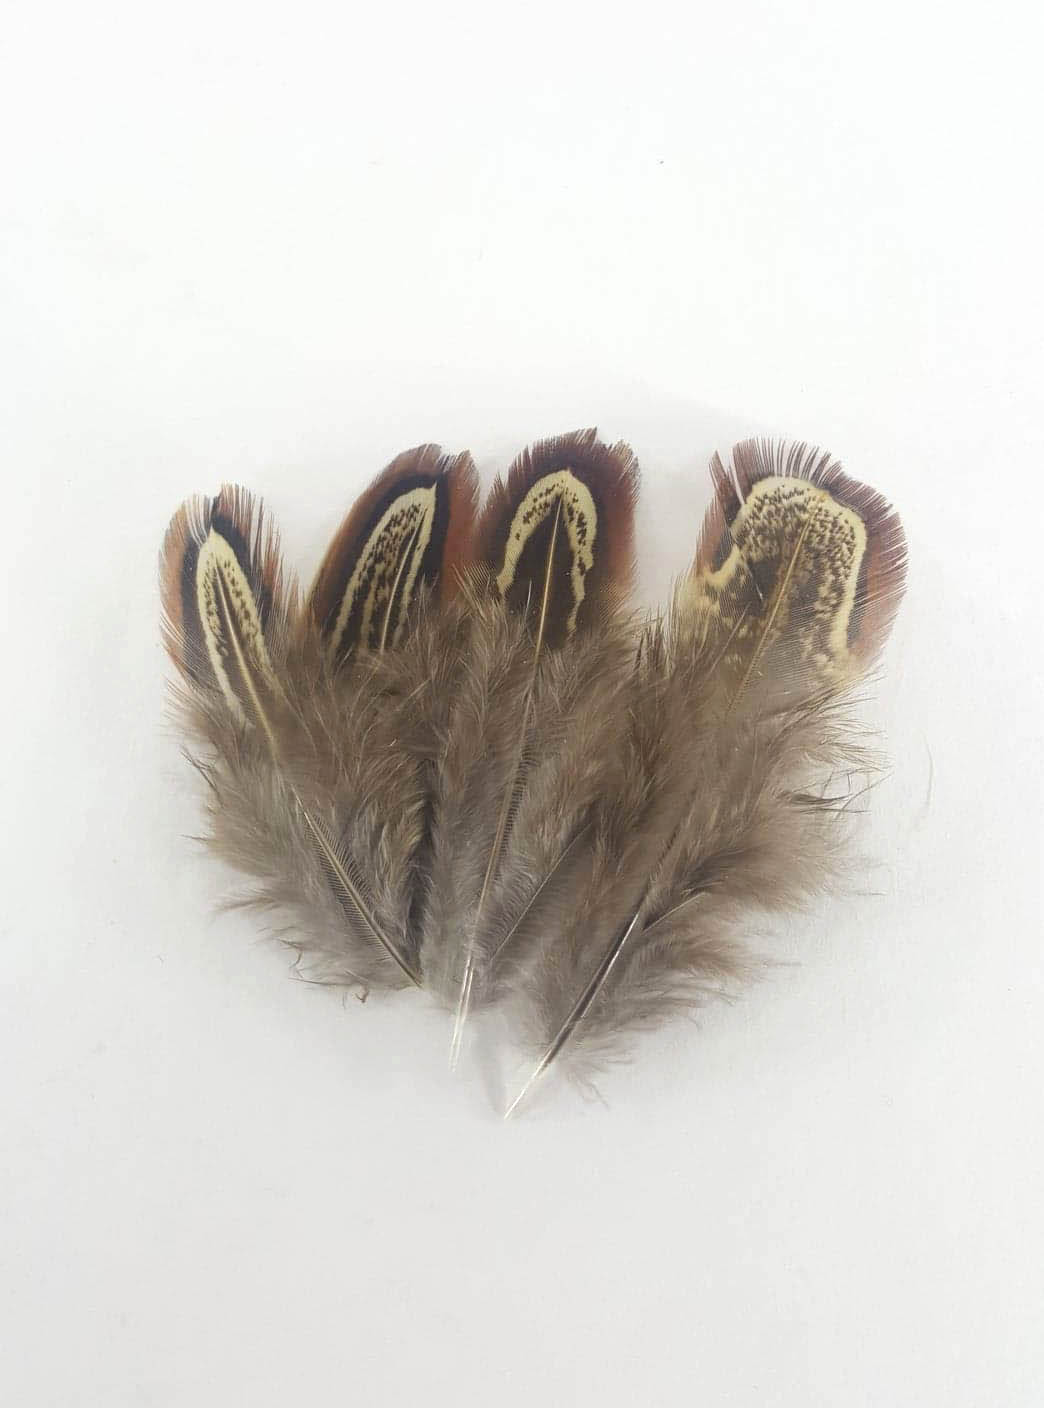 Small brown feathers